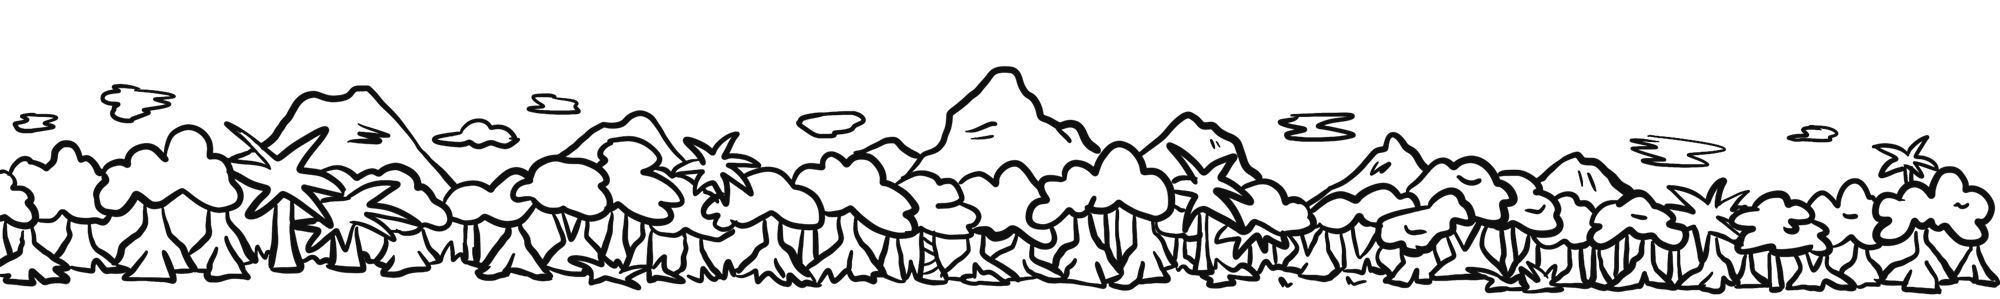 Cartoon drawing of forest and mountains